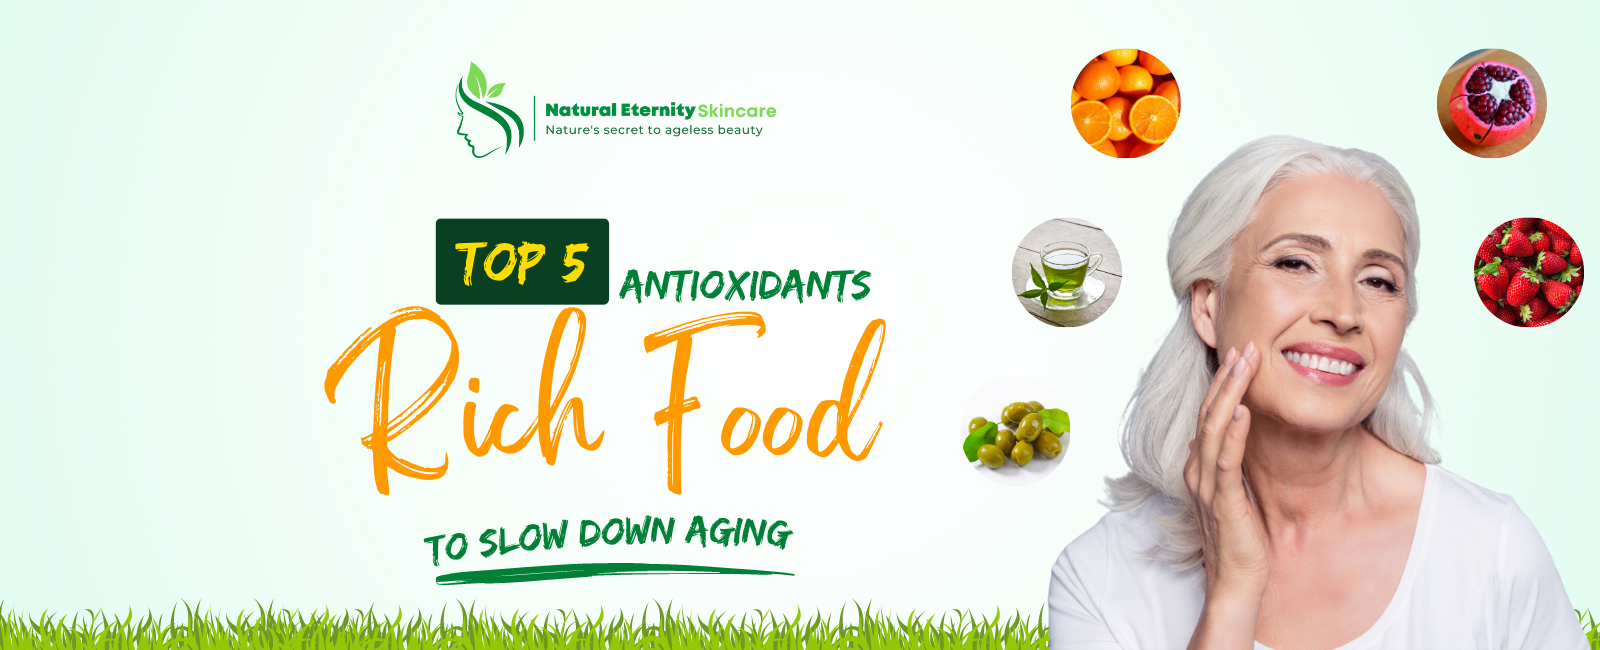 Antioxidant-Rich Foods for Anti-Aging